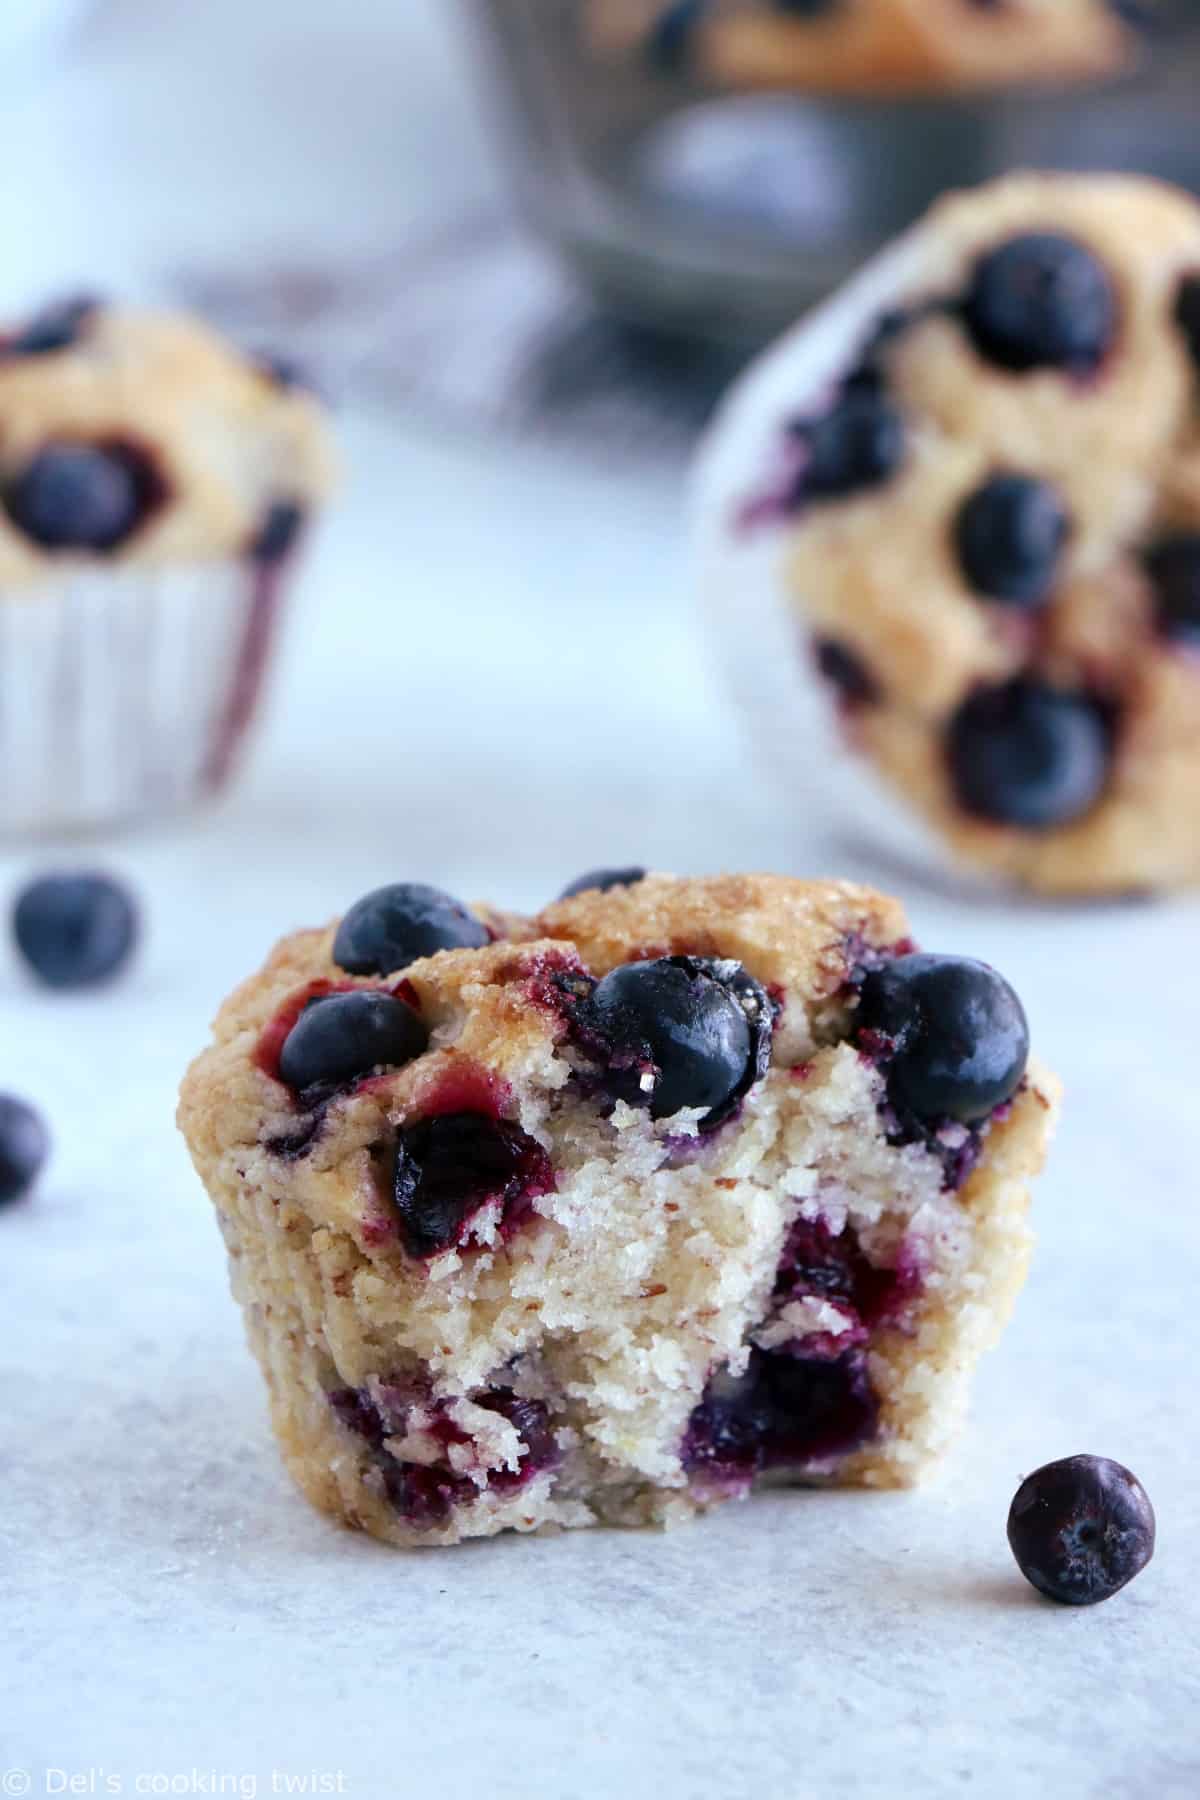 Vegan Blueberry Muffins with Flaxseed